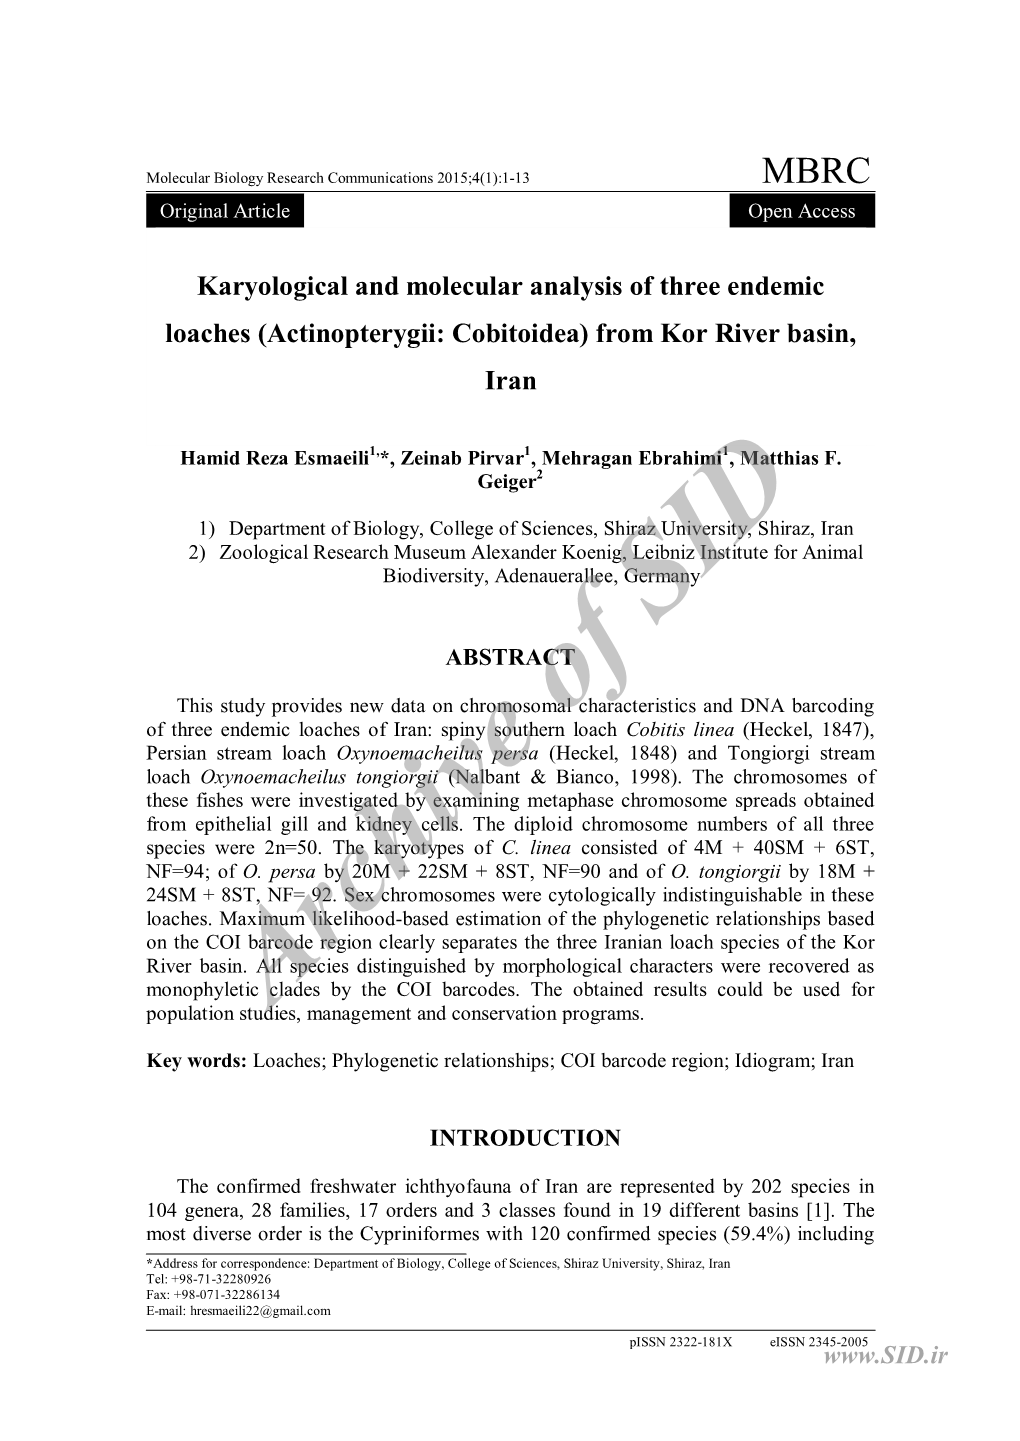 Karyological and Molecular Analysis of Three Endemic Loaches (Actinopterygii: Cobitoidea) from Kor River Basin, Iran